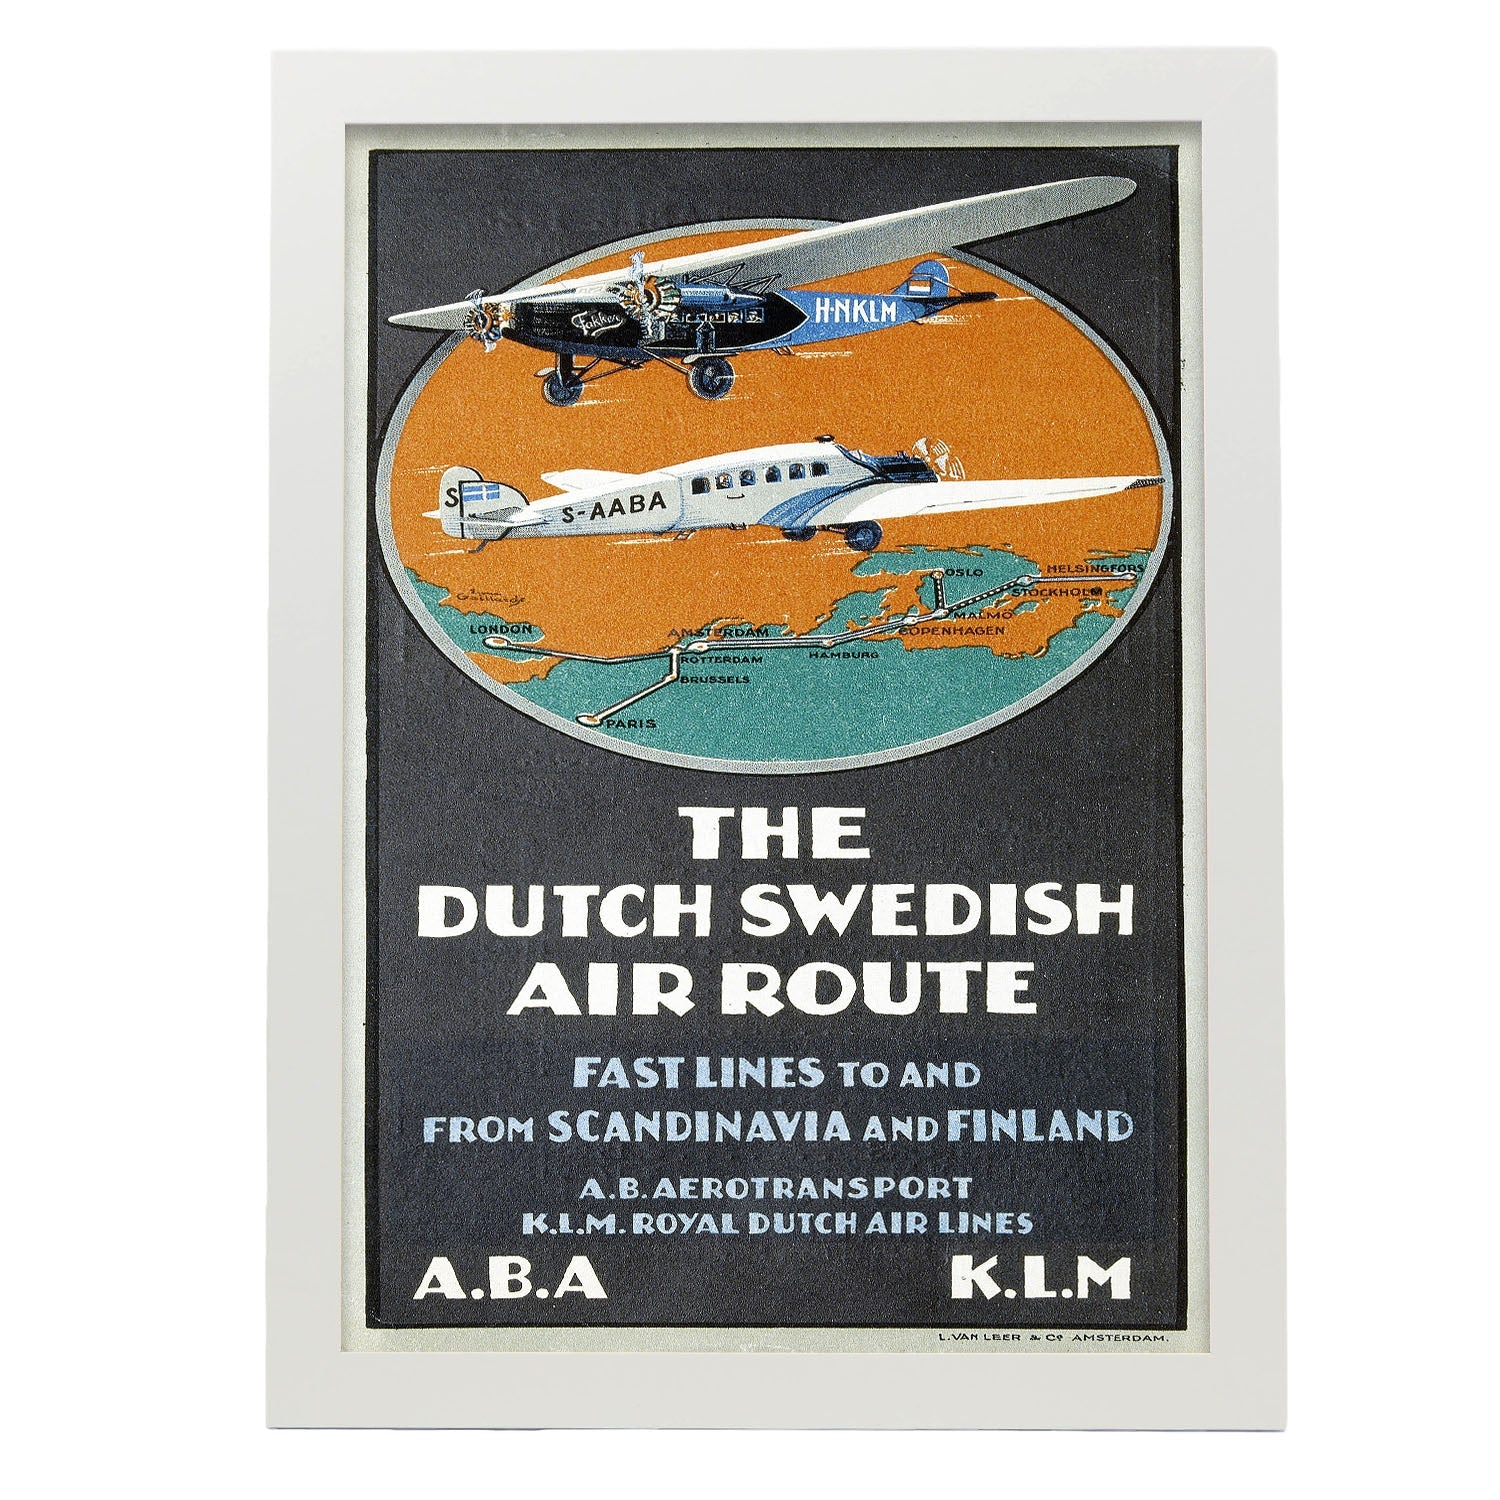 ABA_Advertisment_leaflet_about_The_Dutch_Swedish_Air_Route_by_ABA_and_KLM-Artwork-Nacnic-A3-Marco Blanco-Nacnic Estudio SL